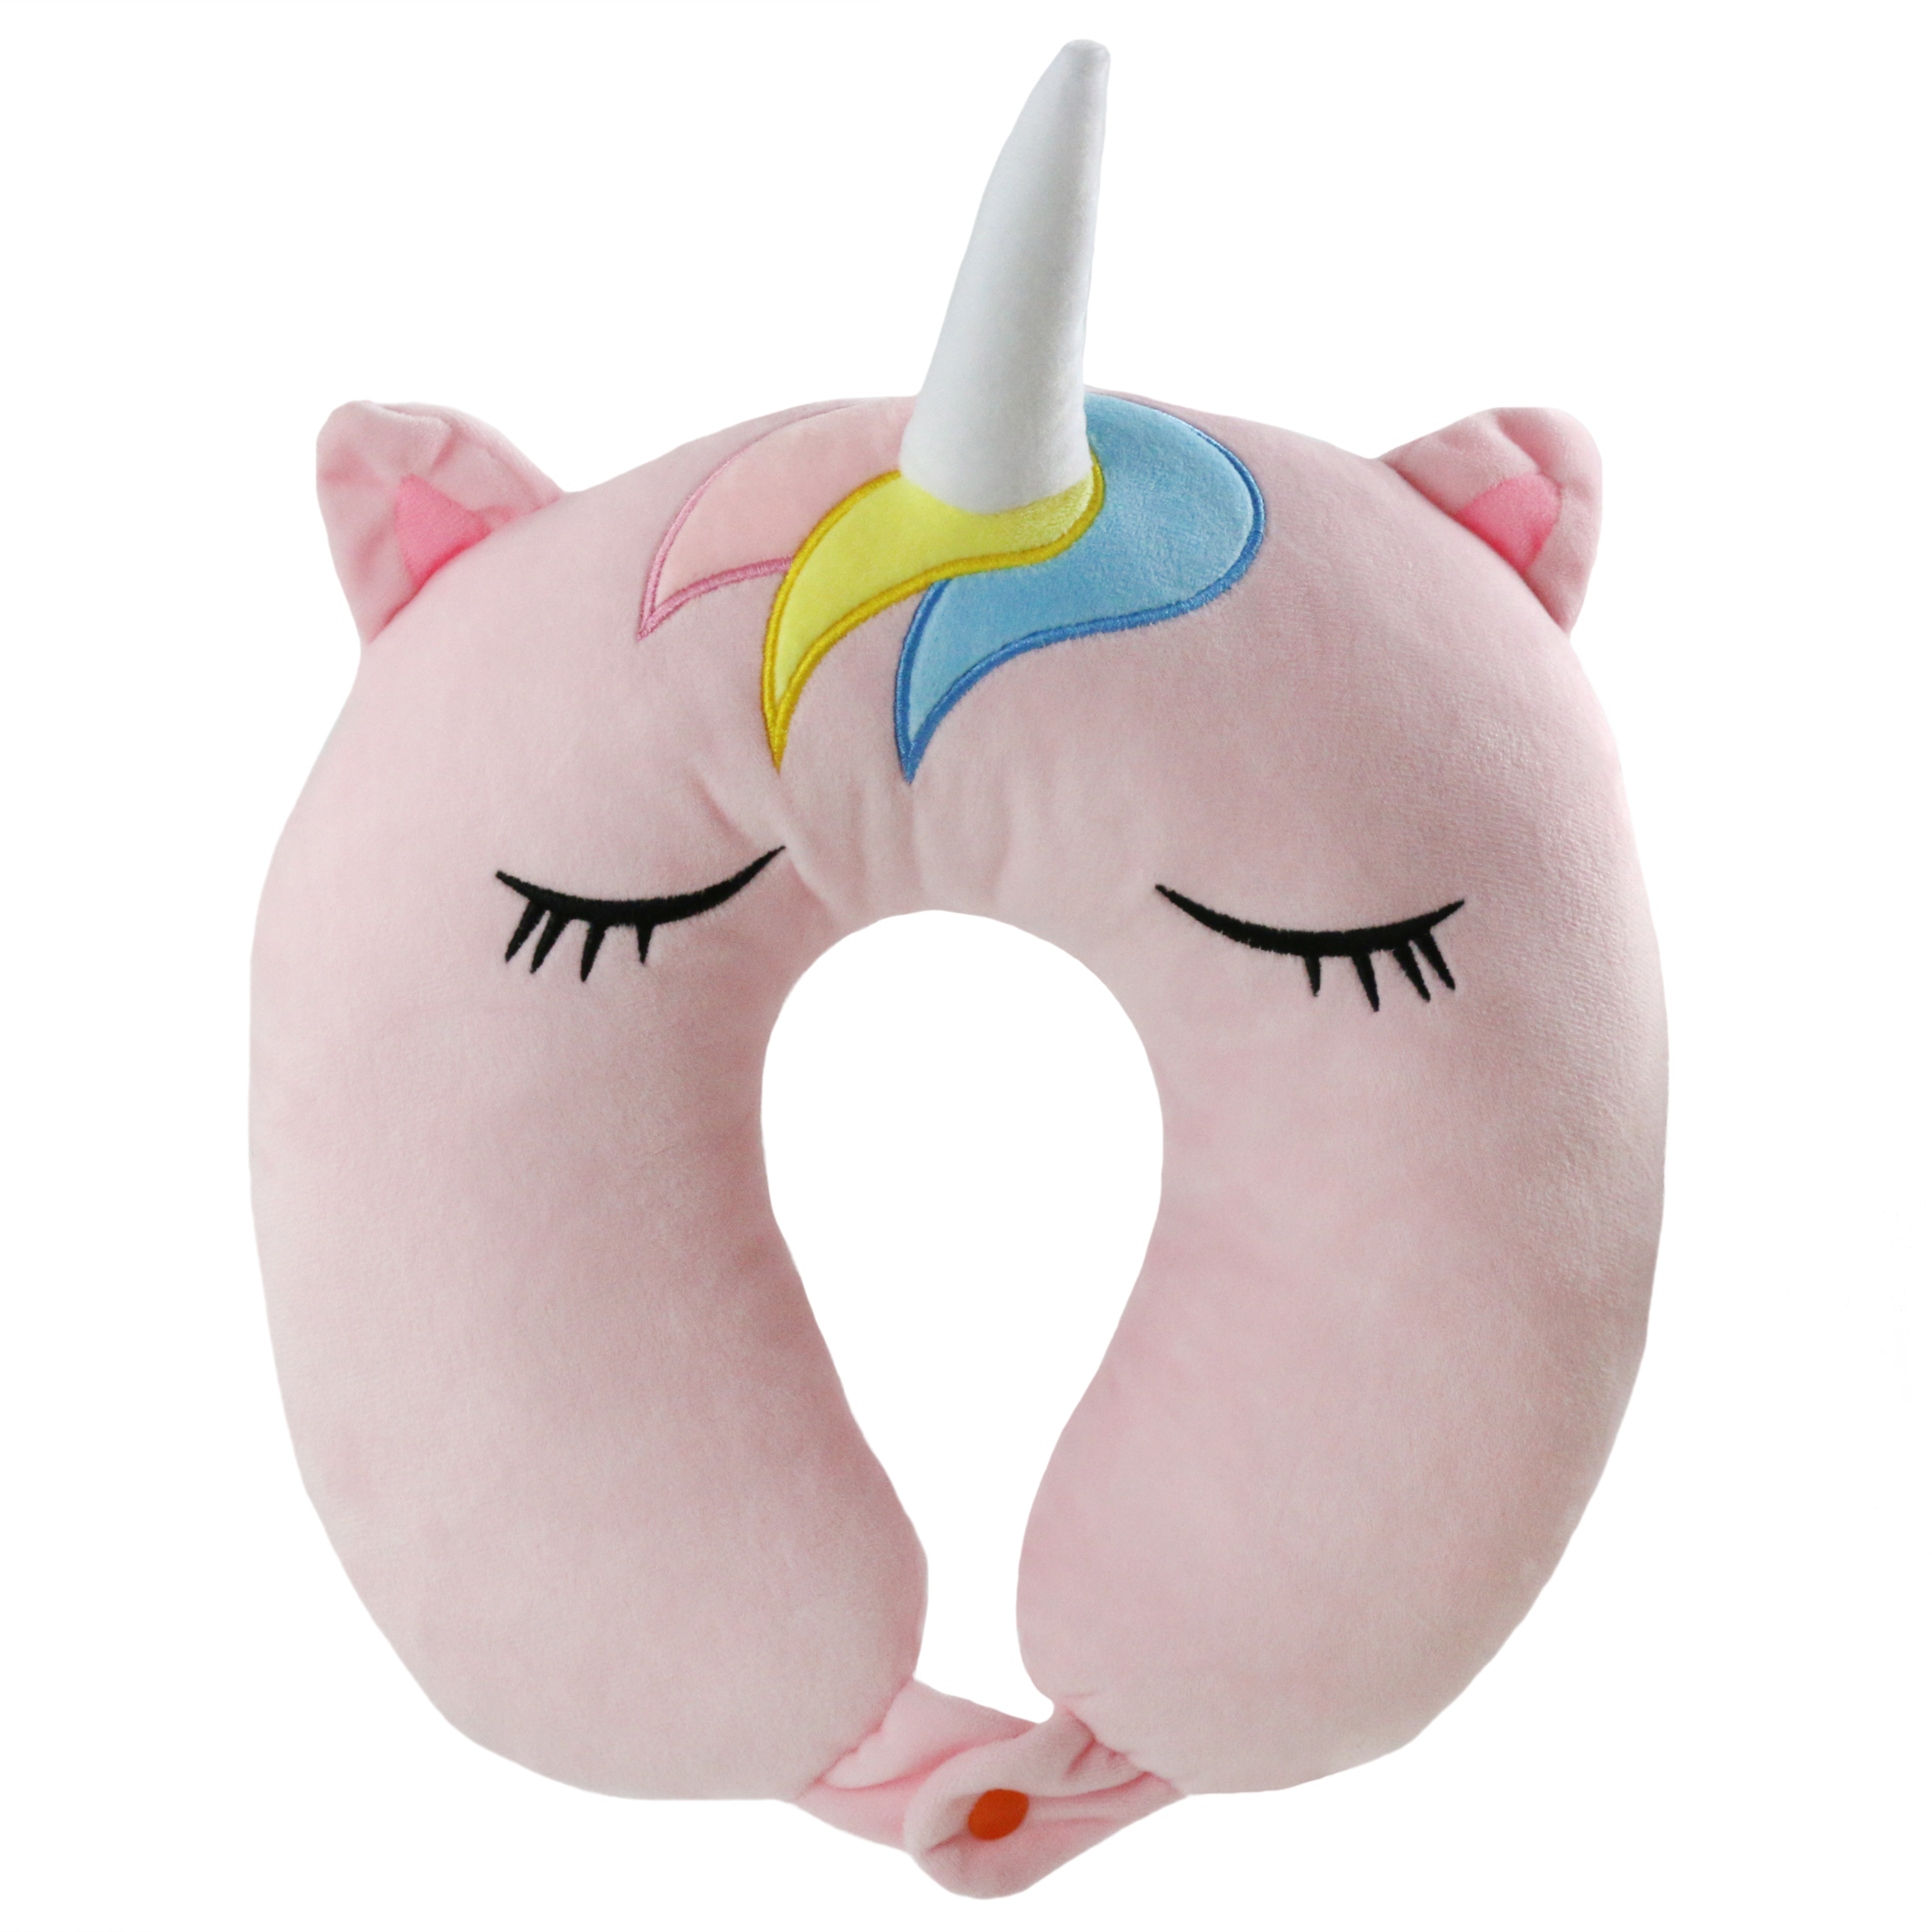 WINBST Unicorn Travel Pillow Neck Pillow U-shaped Neck Roll Seat Pillow Supports the head Travel Pillow